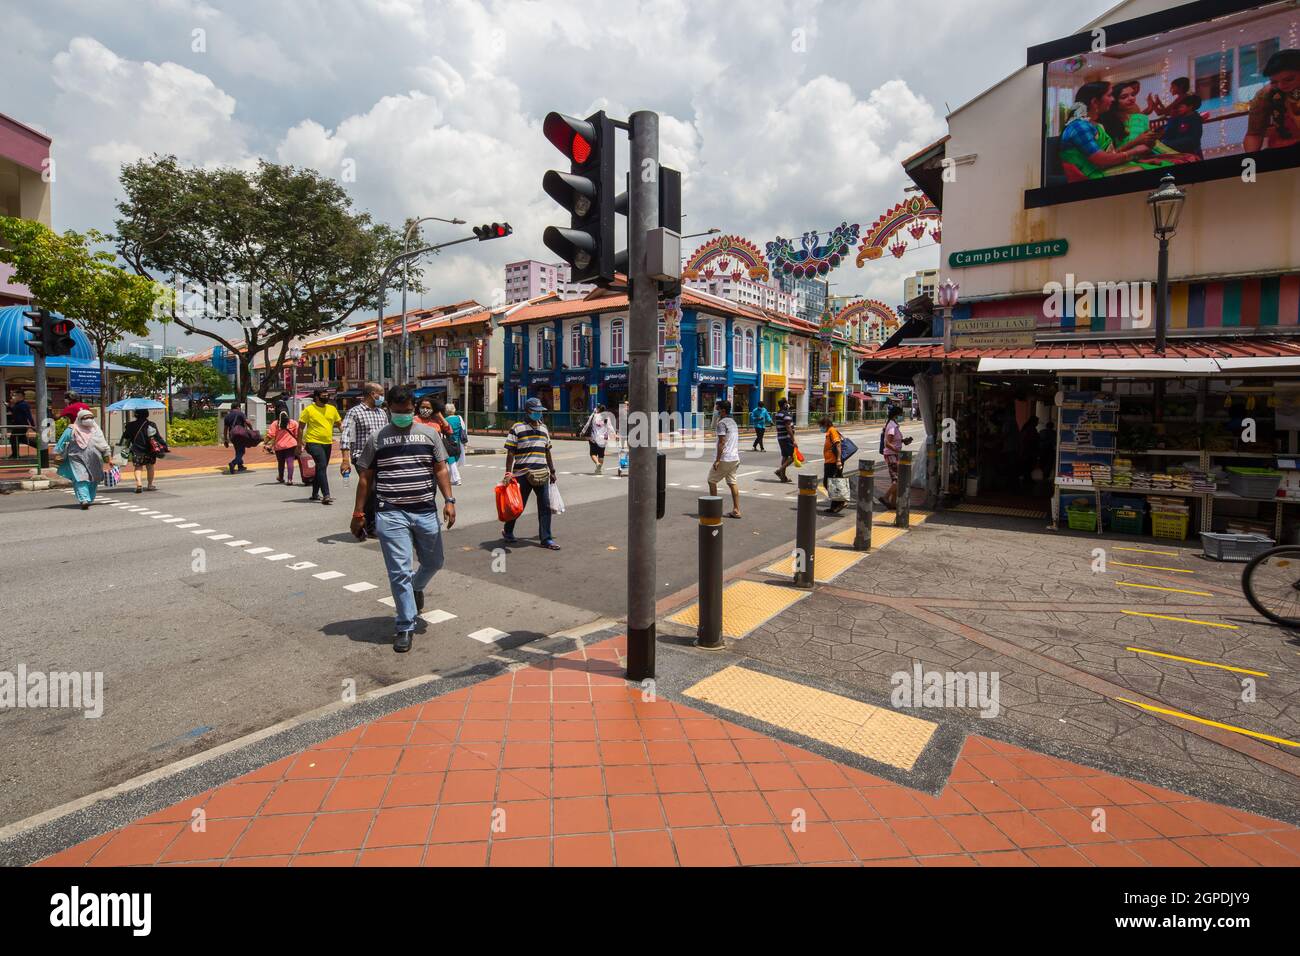 People wearing mask are crossing the road, public are encourage to wear a mask at outdoor condition to prevent virus spread. Little India, Singapore. Stock Photo